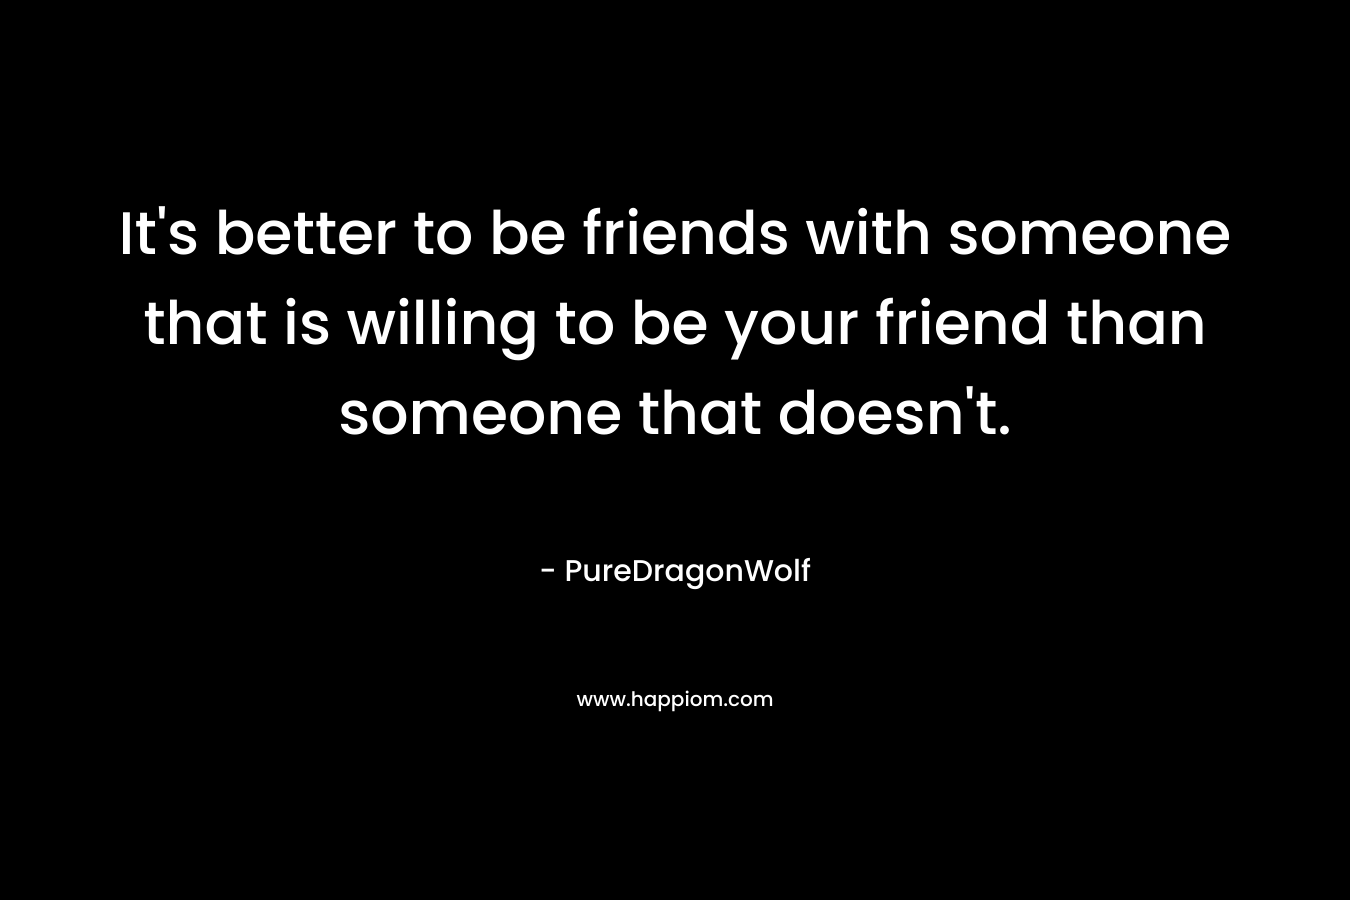 It's better to be friends with someone that is willing to be your friend than someone that doesn't.